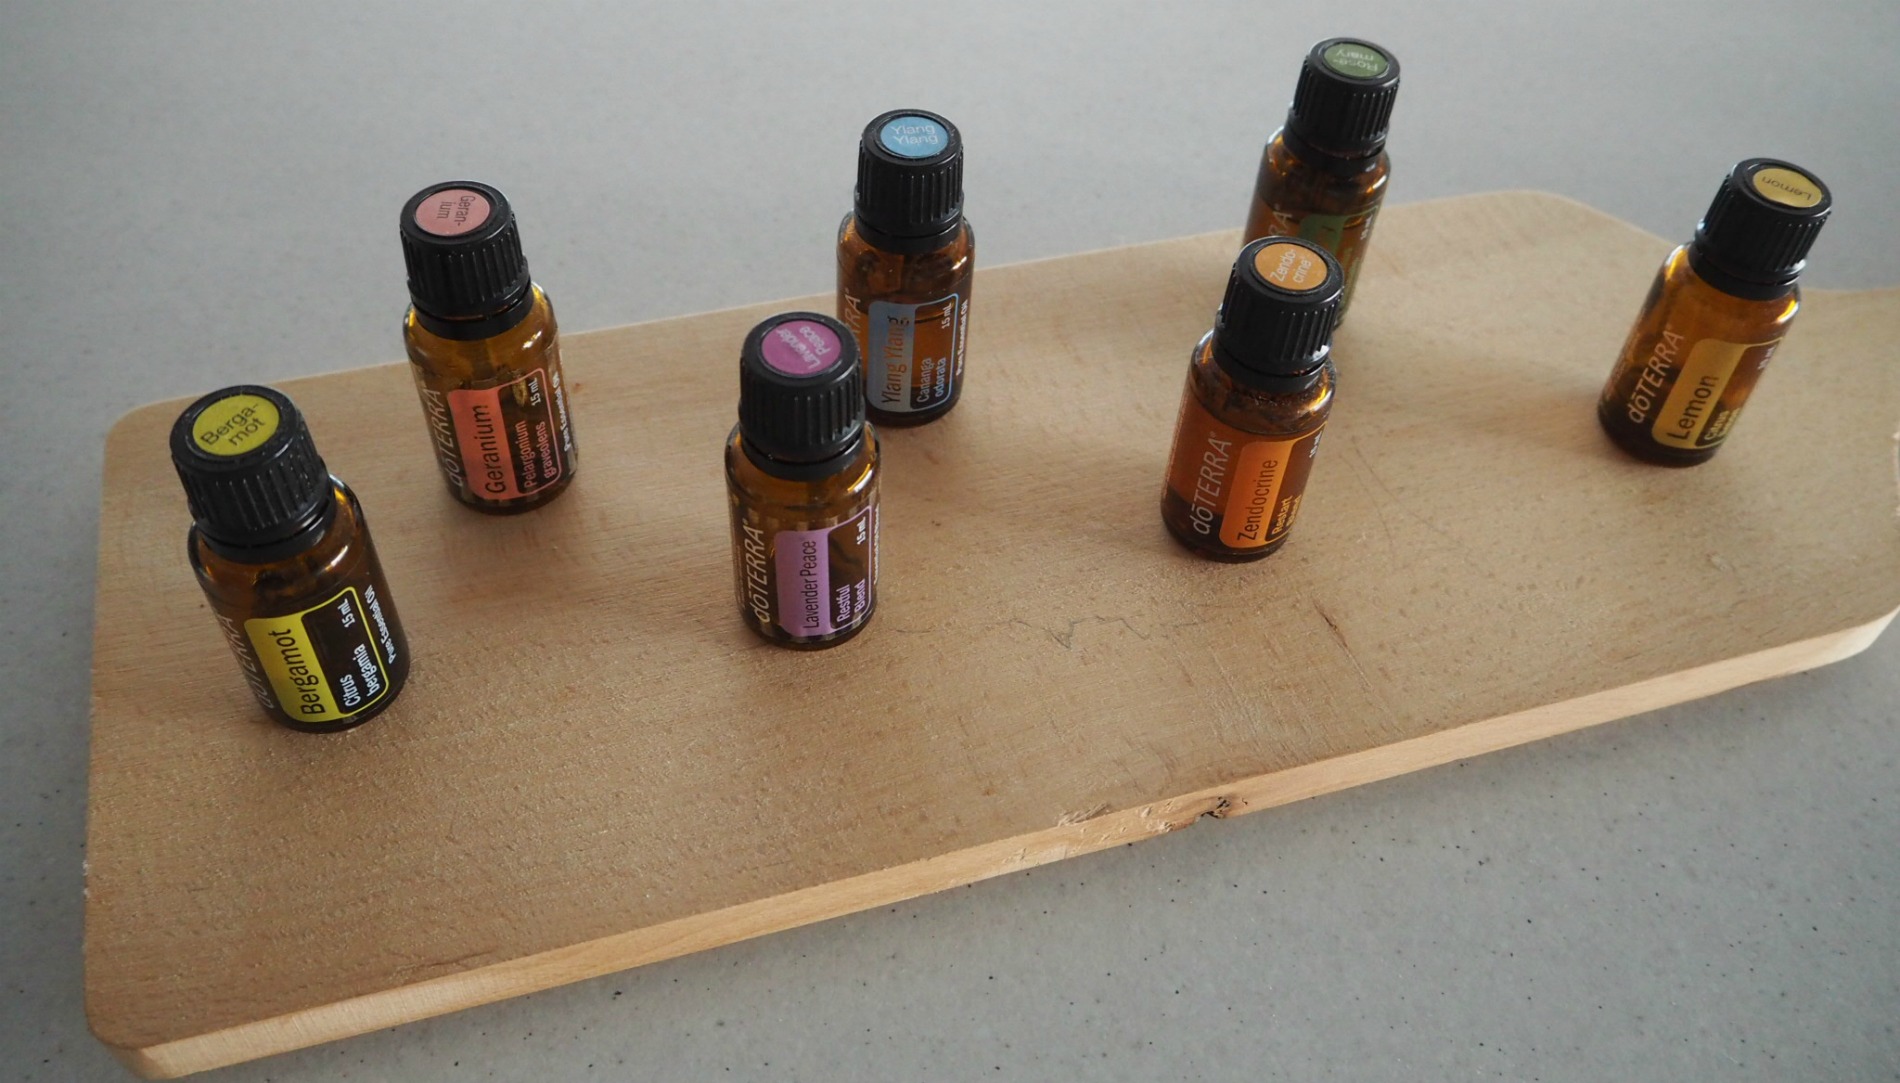 8 Ways to Display and Store Essential Oils at Home